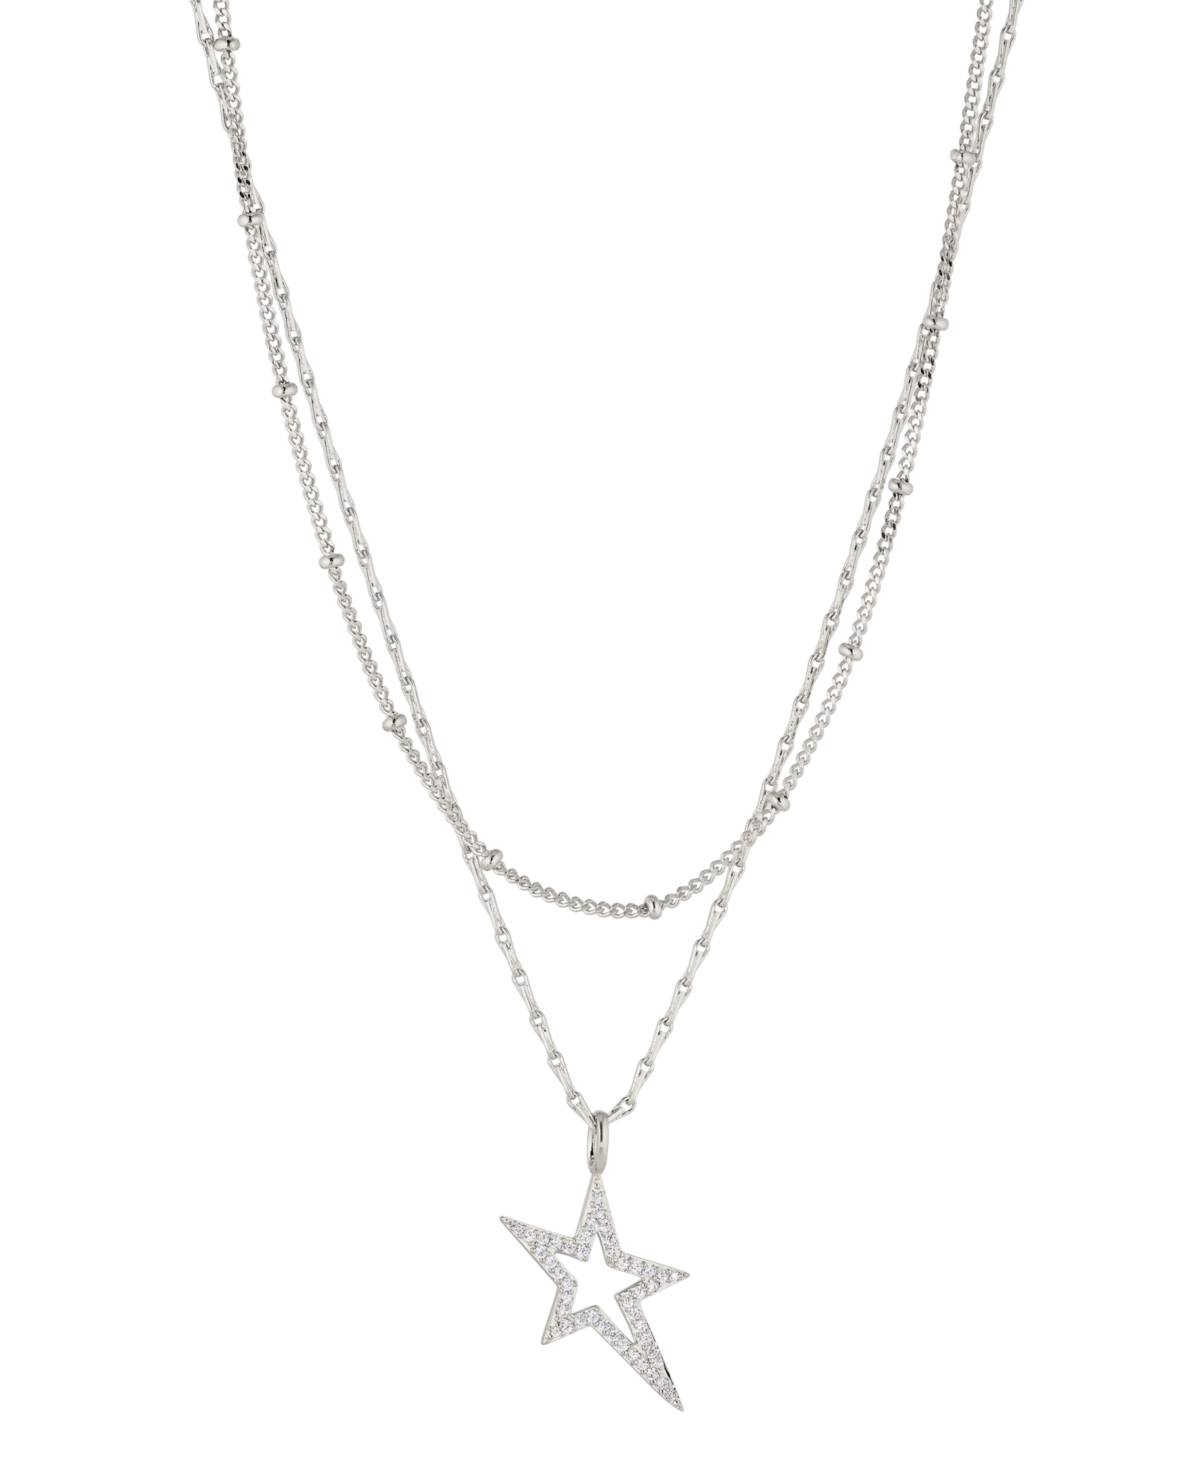 Double Layered Star Necklace in Silver-Tone Brass - Silver-Tone